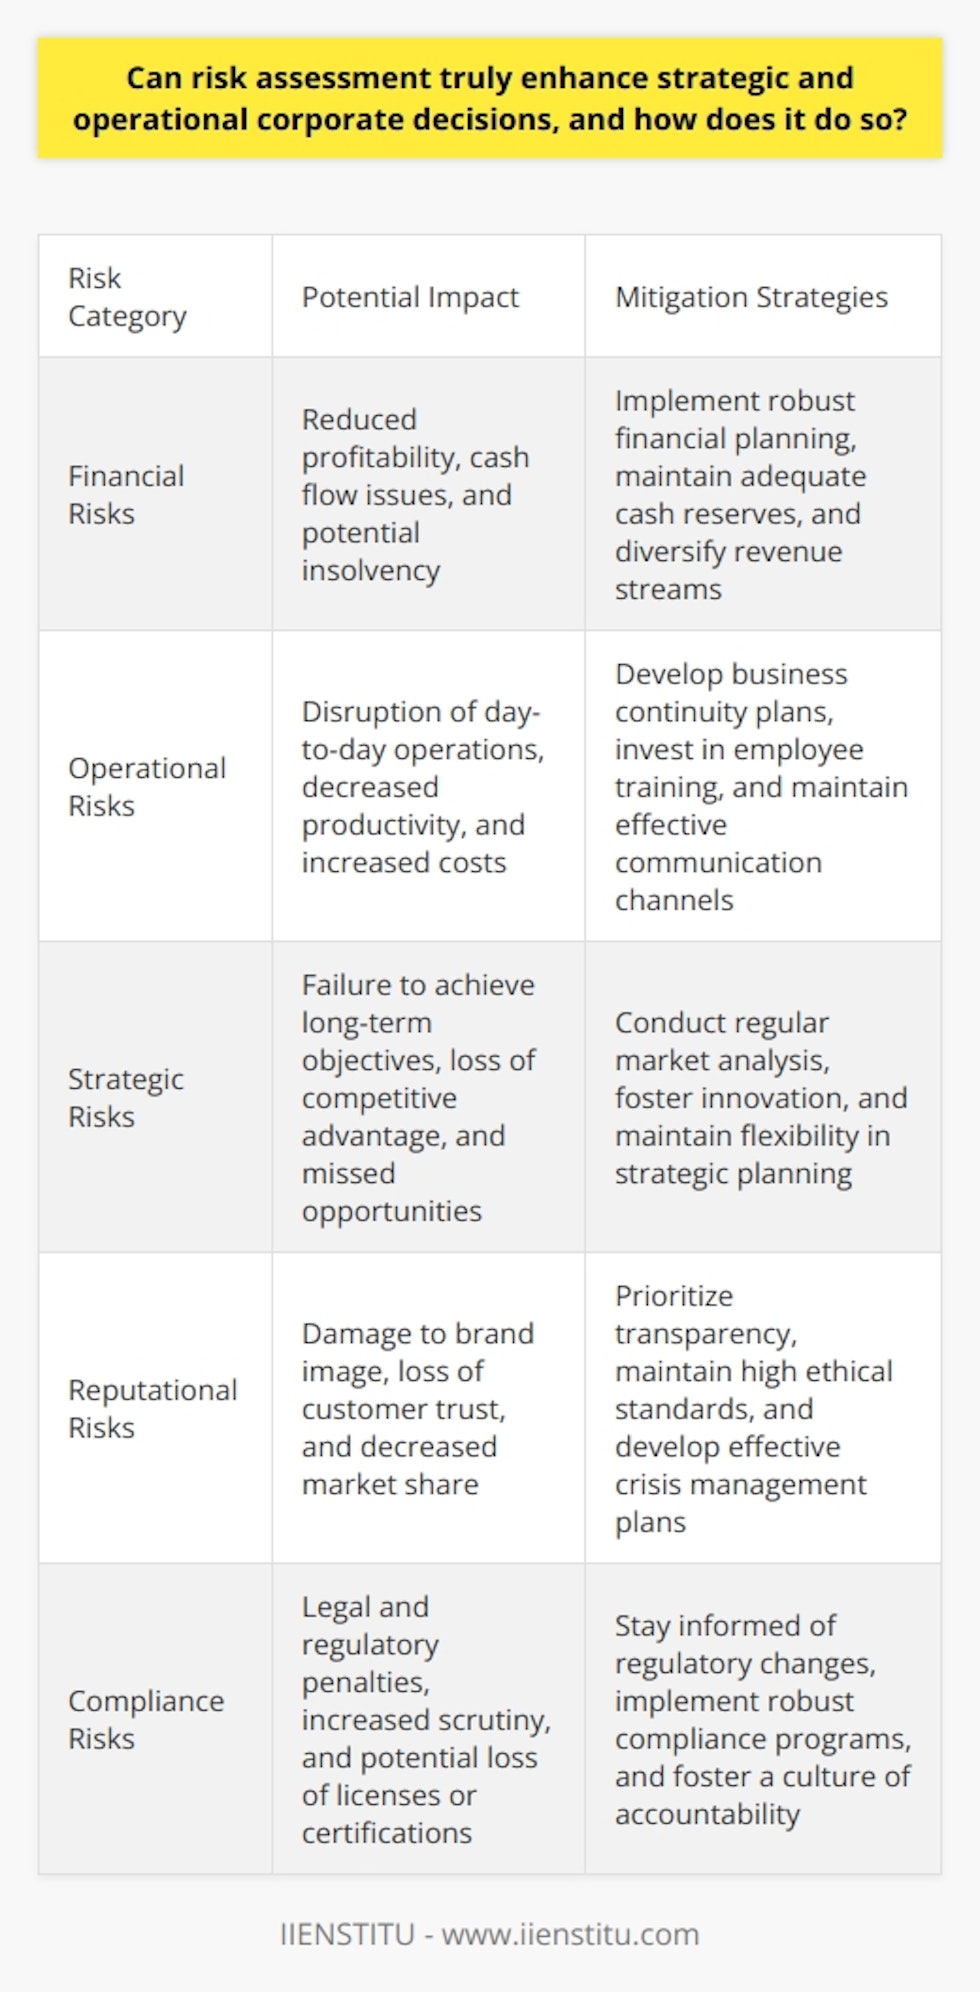 Risk assessment stands as a critical tool. It forms the backbone of effective decision-making in businesses. Corporations encounter risks in numerous forms. These extend from financial, operational, to strategic challenges. A well-structured risk assessment process can thus enhance decision-making at both strategic and operational levels.  Understanding Risk Assessment At its core, risk assessment involves identifying, analyzing, and evaluating risks. It is about understanding potential threats to a corporations objectives. The practice prioritizes risks based on their potential impact and likelihood.  Enhancing Strategic Decisions Strategic decisions shape the future of a company. They require a long-term outlook and are often complex in nature. Risk assessment provides a foundation for informed strategic choices. It does so by identifying potential hazards to long-term goals. This enables leaders to develop strategies that are robust and resilient. Operational Decisions Similarly, risk assessment influences day-to-day management. It does this by identifying what could go wrong at an operational level. It allows for the implementation of proactive measures. This minimizes disruptions in the companys operations. It ensures that resources can focus on value-adding activities. Risk Assessment and Decision-Making Relevant risk assessment equips decision-makers with critical insights. It provides a clearer picture of the risk landscape. This information guides both strategic plans and operational tactics. - Prioritization becomes easier  - Resource allocation improves - Strategies become more adaptive  Frameworks and Methodologies A variety of frameworks and methodologies support risk assessment. These ensure that the process is systematic and comprehensive. - It integrates qualitative and quantitative measures  - It highlights interdependencies among risks  - It uncovers insights through scenario planning  Effective Implementation Effective risk assessment requires commitment and expertise. Stakeholders need to understand its importance. Management must support its integration into corporate decision-making processes.  - Communication is key to its success  - Training enhances its effectiveness  - It fosters a risk-aware culture  Conclusion Risk assessment does not only identify threats. It also reveals opportunities. It allows businesses to navigate uncertainty with confidence. It makes strategies more robust and operations more secure. Corporations thus benefit from decision-making processes that are informed, strategic, and practical.